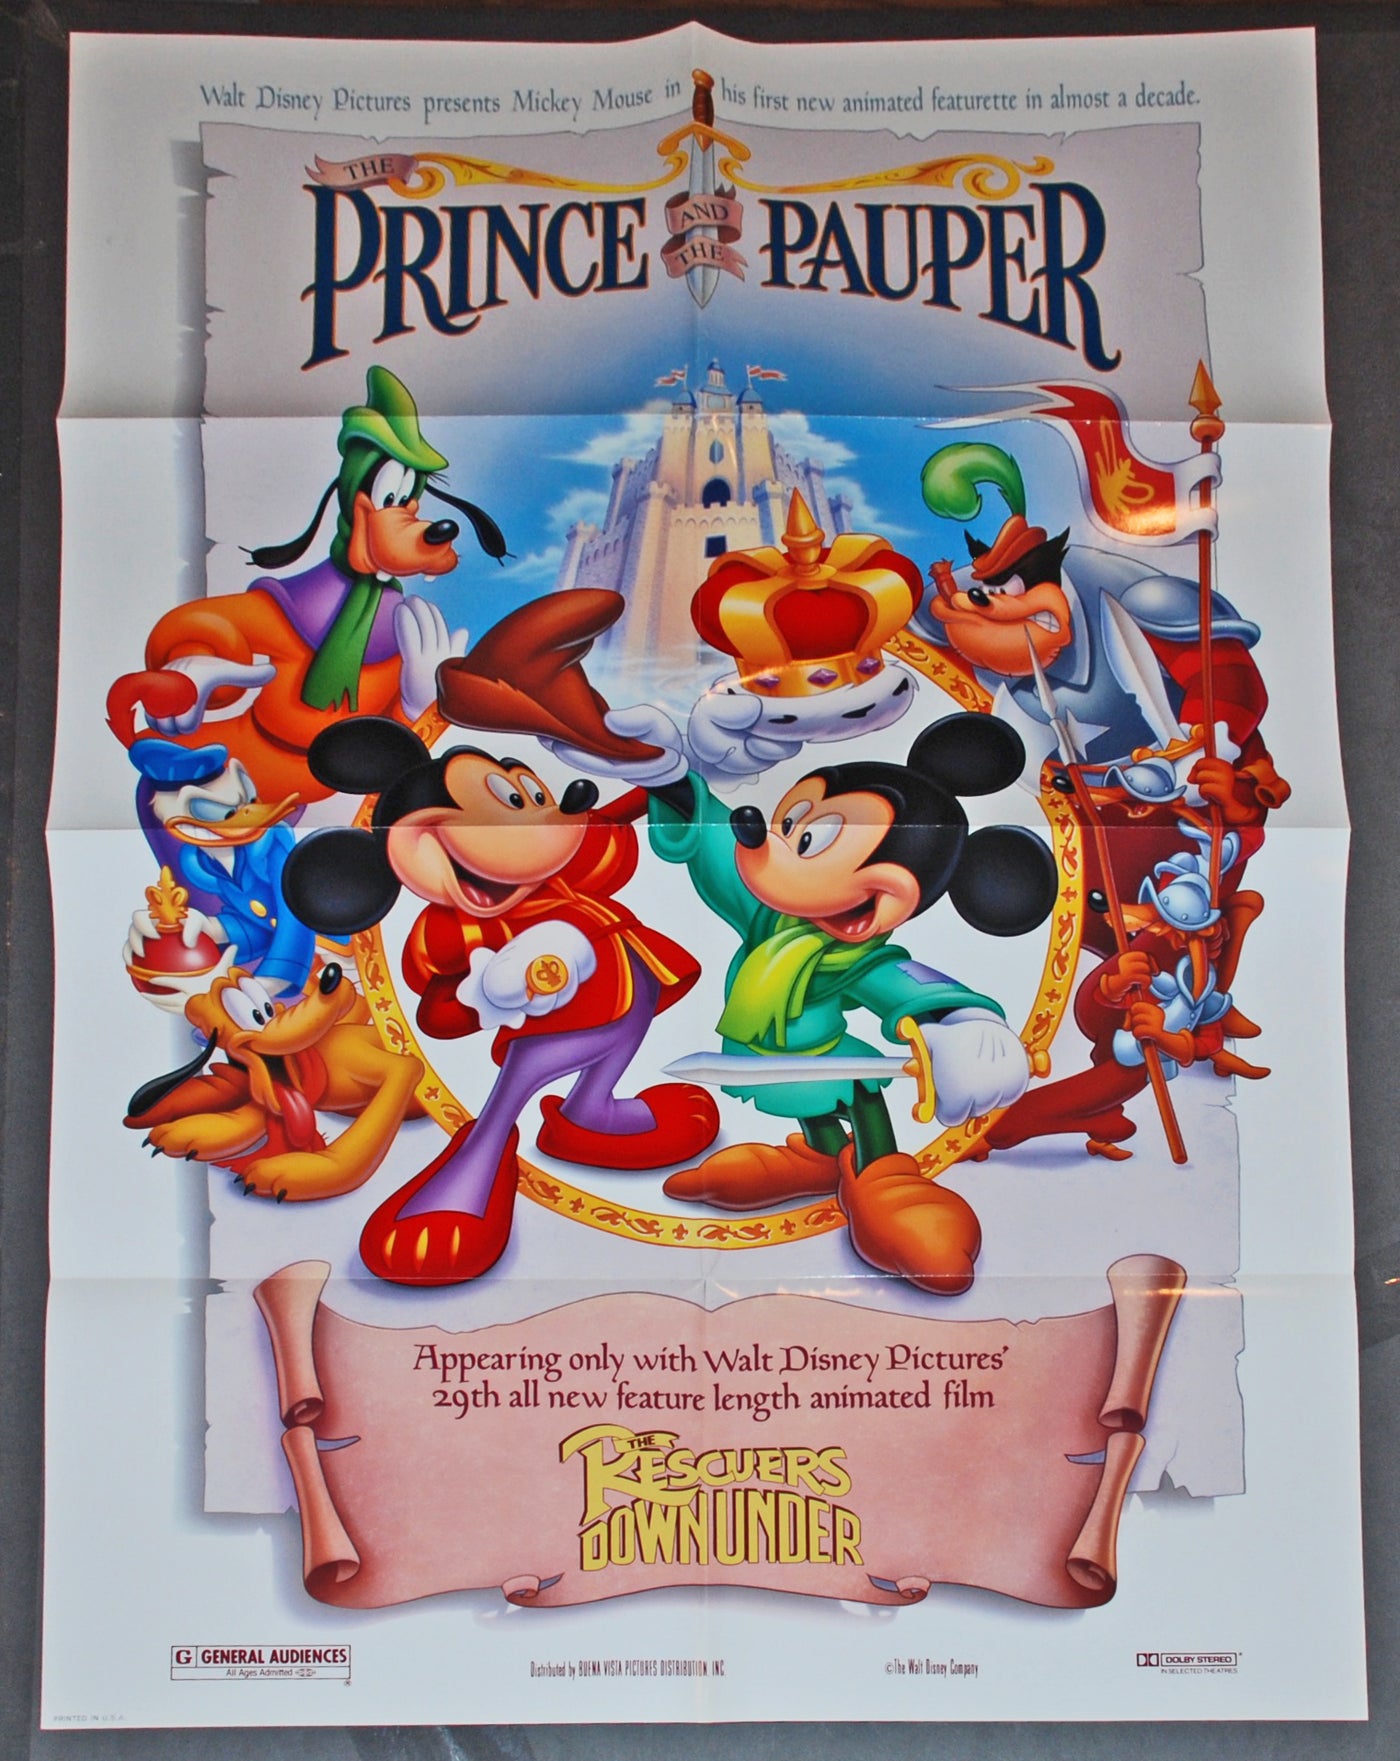 Disney Animation One-Sheet Movie Poster Featuring Prince and the Pauper